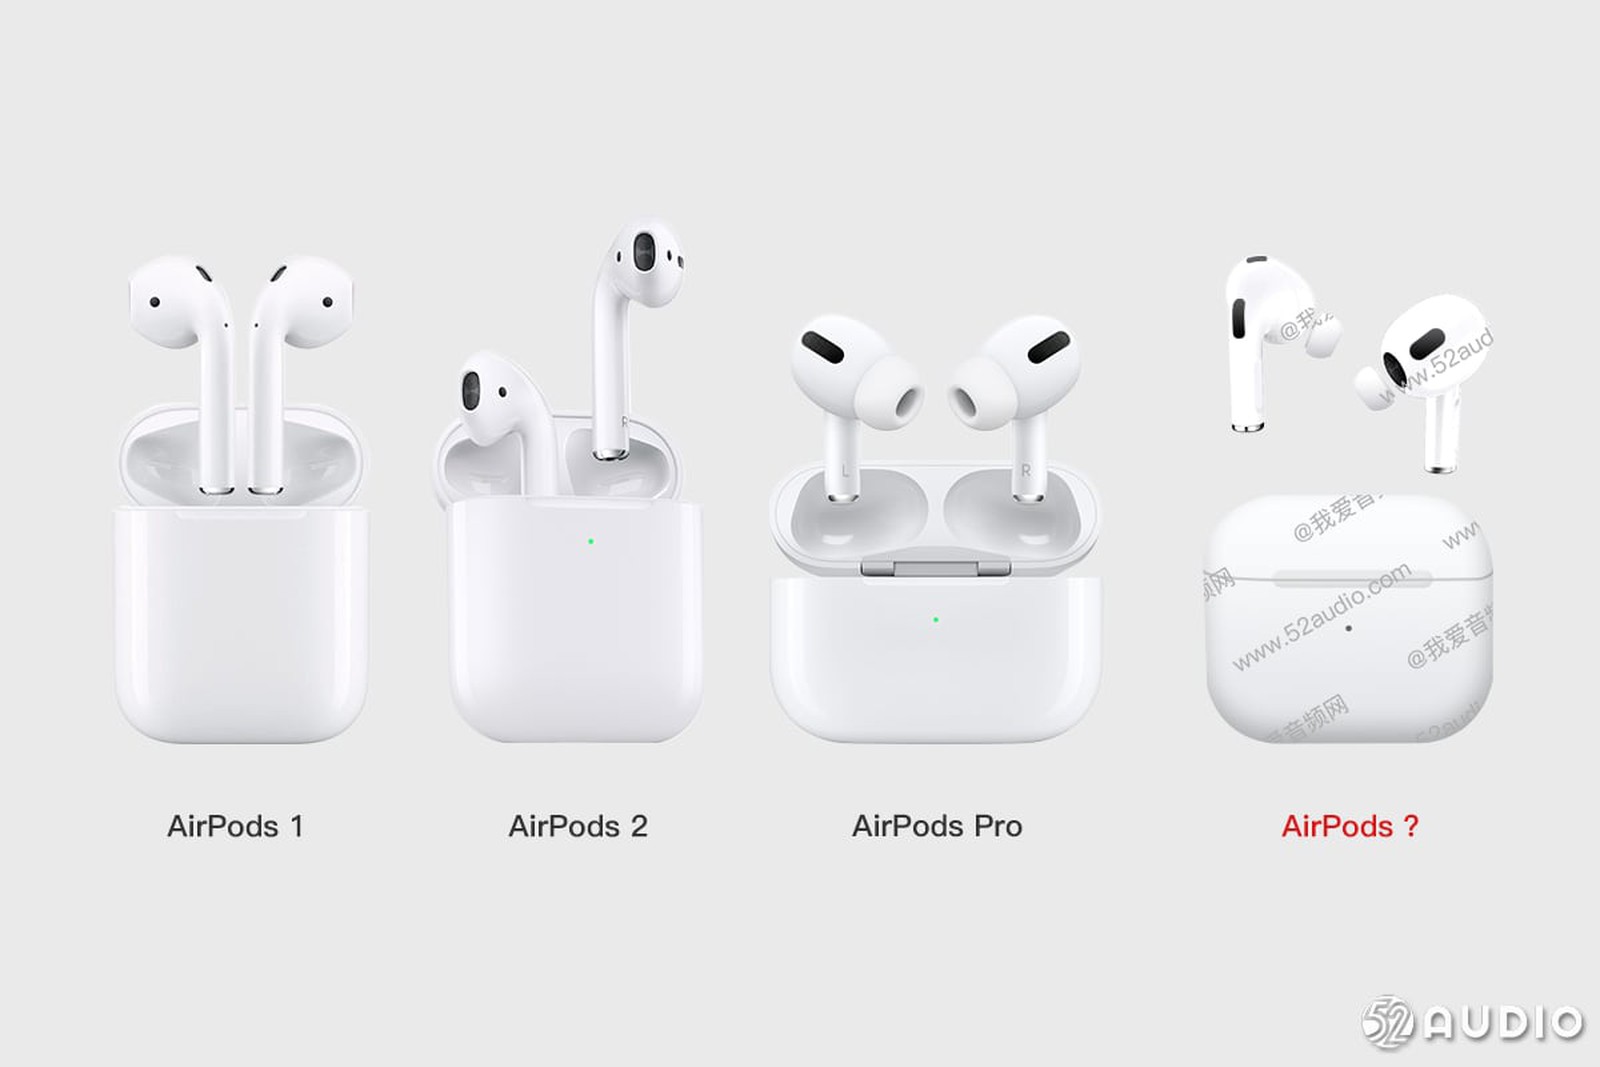 New AirPods Expected Later This Year as Suppliers Begin Component